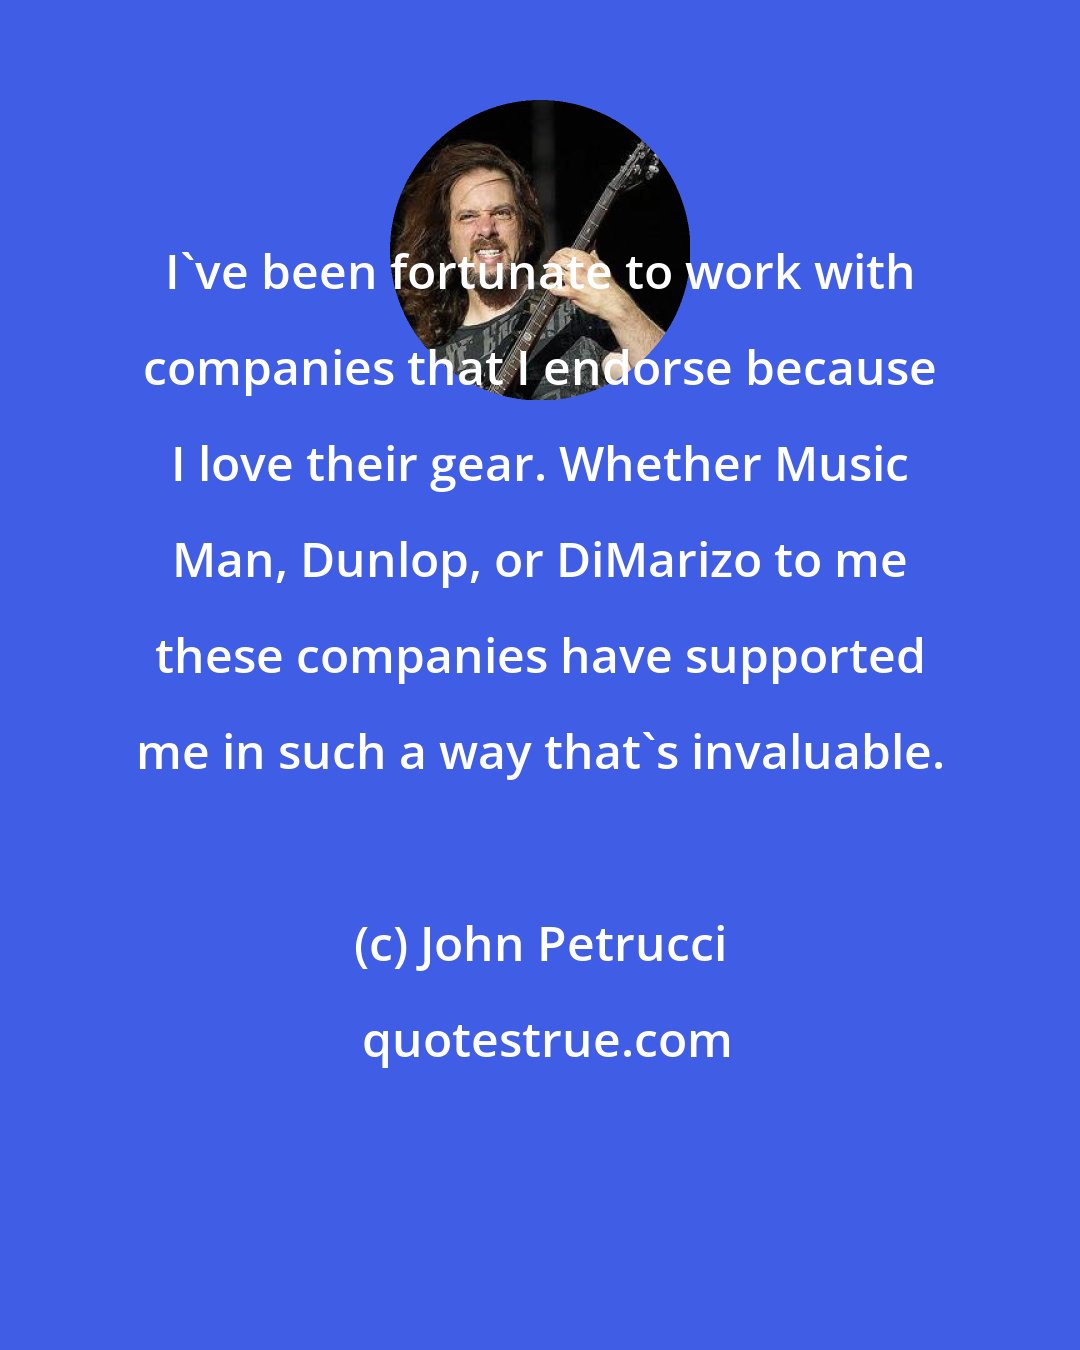 John Petrucci: I've been fortunate to work with companies that I endorse because I love their gear. Whether Music Man, Dunlop, or DiMarizo to me these companies have supported me in such a way that's invaluable.